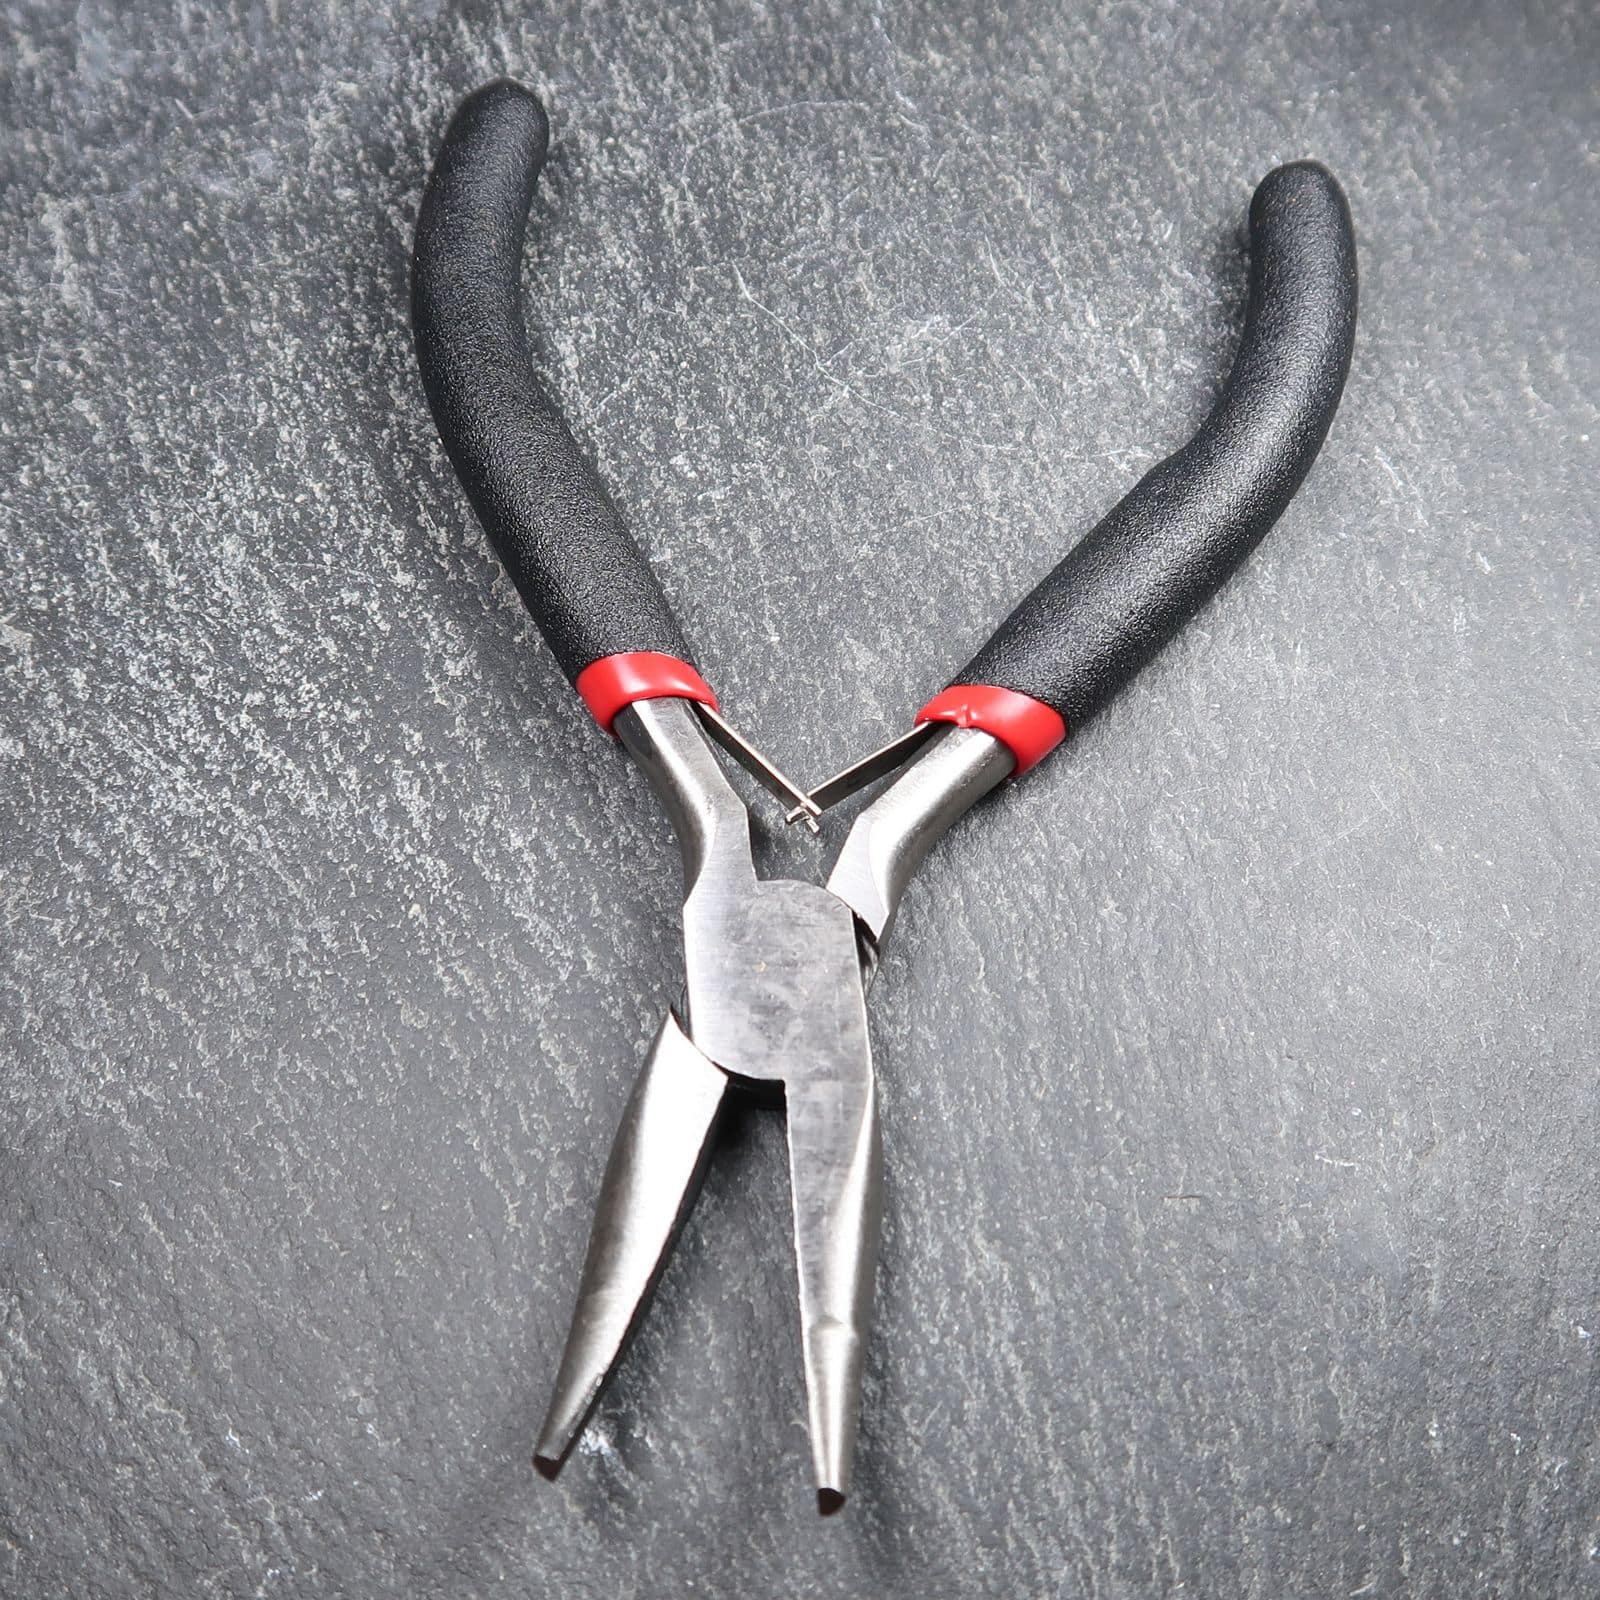 Aven 10309 Smooth Jaws Bent Nose Pliers - 4.5 inch